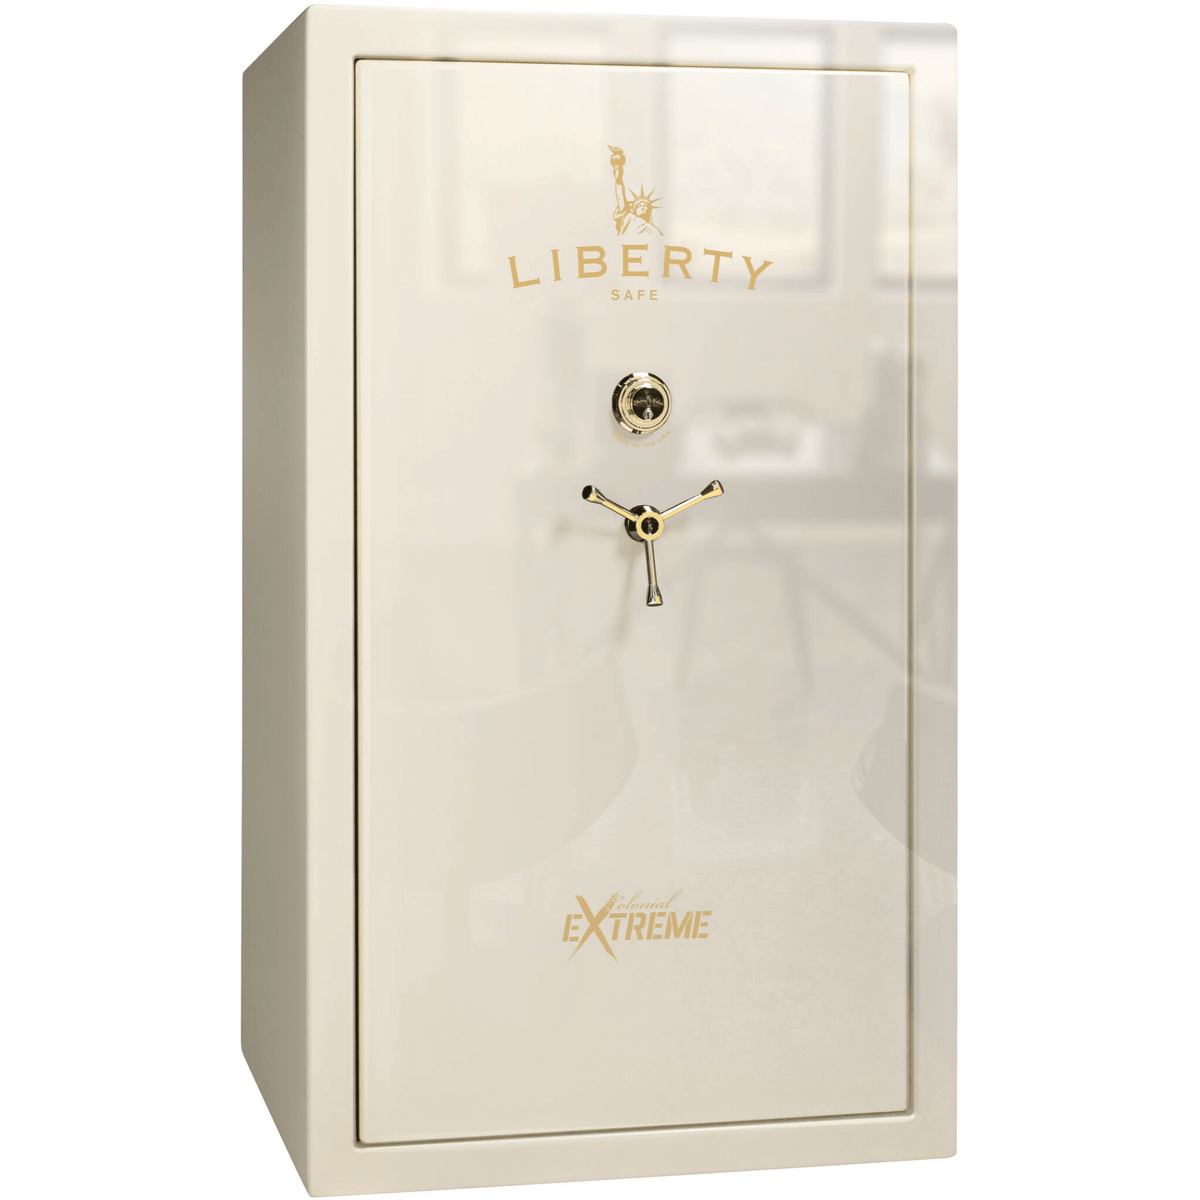 Liberty Colonial 50 Extreme Safe in White Gloss with Brass Mechanical Lock.